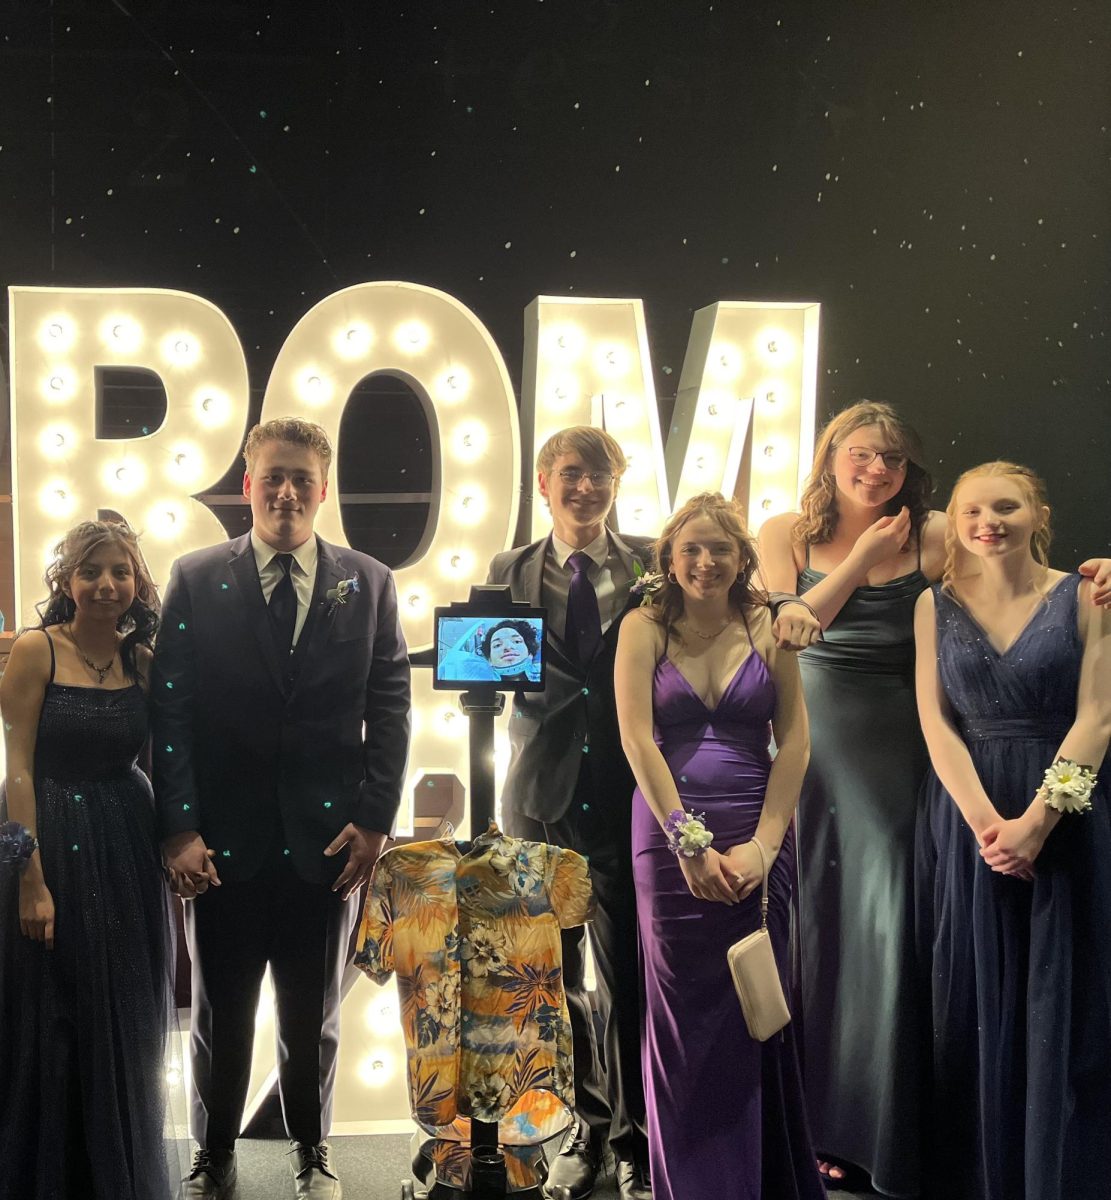 Norwalk students gather with senior Jayden Overton attending prom virtually on Saturday, April 6, at the Science Center of Iowa. Friends of Overton made it possible for him to attend his senior Prom despite being unable to make it.